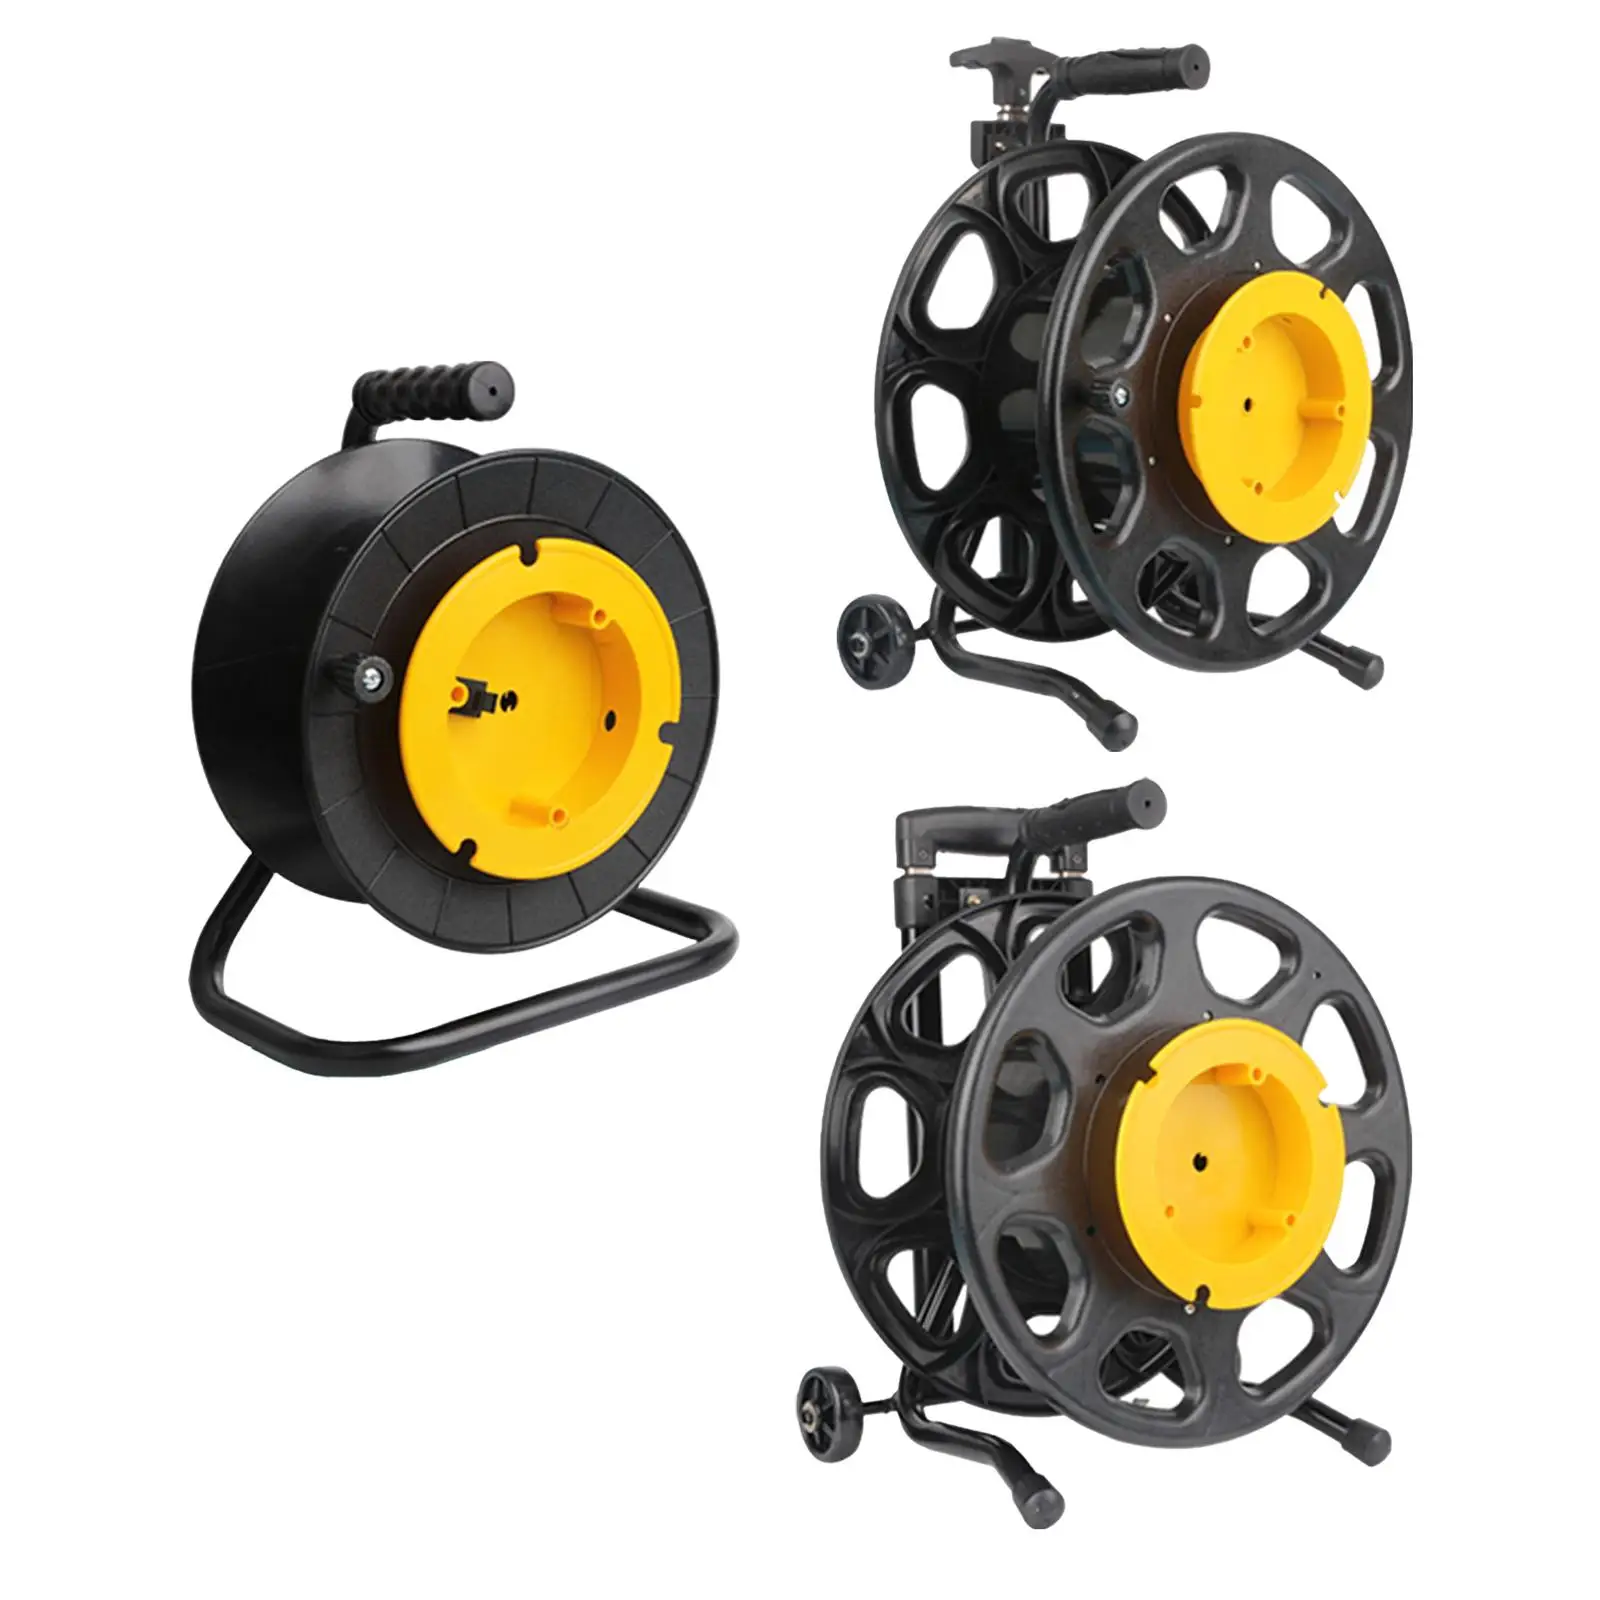 Mobile Cable Reel Extension Cord Reel Easy to Grip Optical Fiber Empty Disk for Lawnmower Cable Workshop Garden Accessories Yard